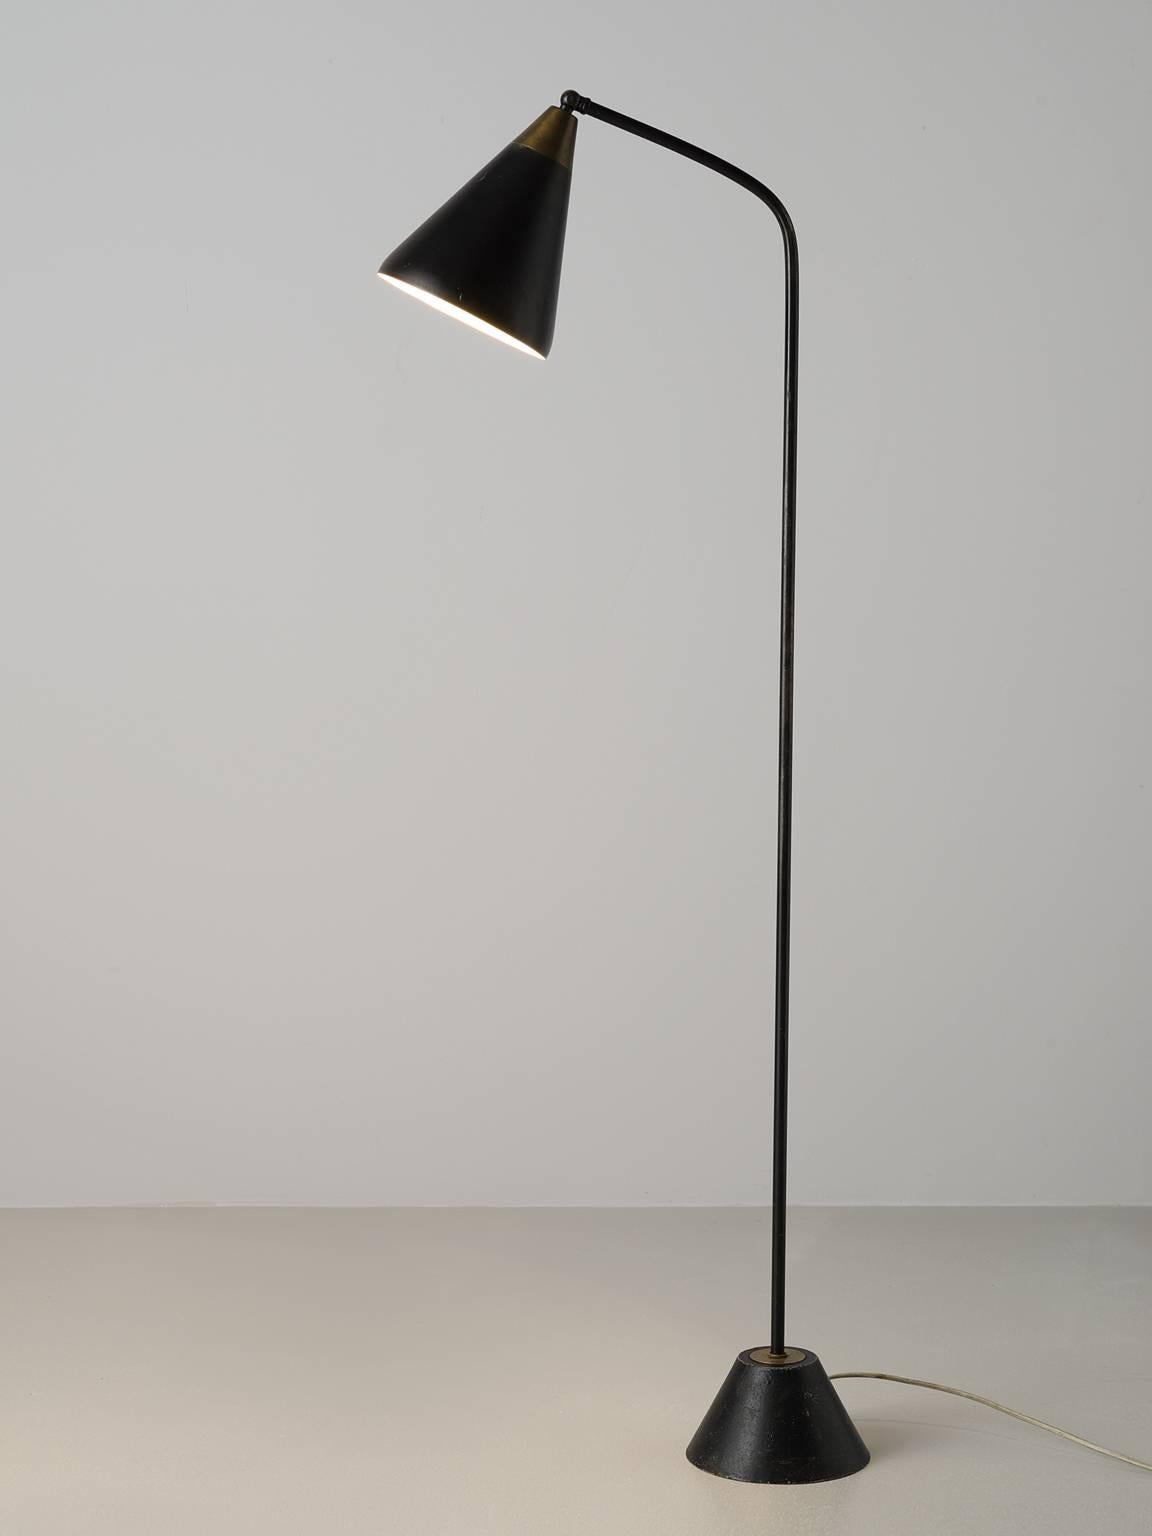 Floor lamp, lacquered metal, brass by Hans Bergström for Ateljé Lyktan, Sweden, 1950s.

This slender floor lamp is designed by the Swede Hans Bergström. The lamp features an adjustable shade with decorative holes in the rim of shade and a